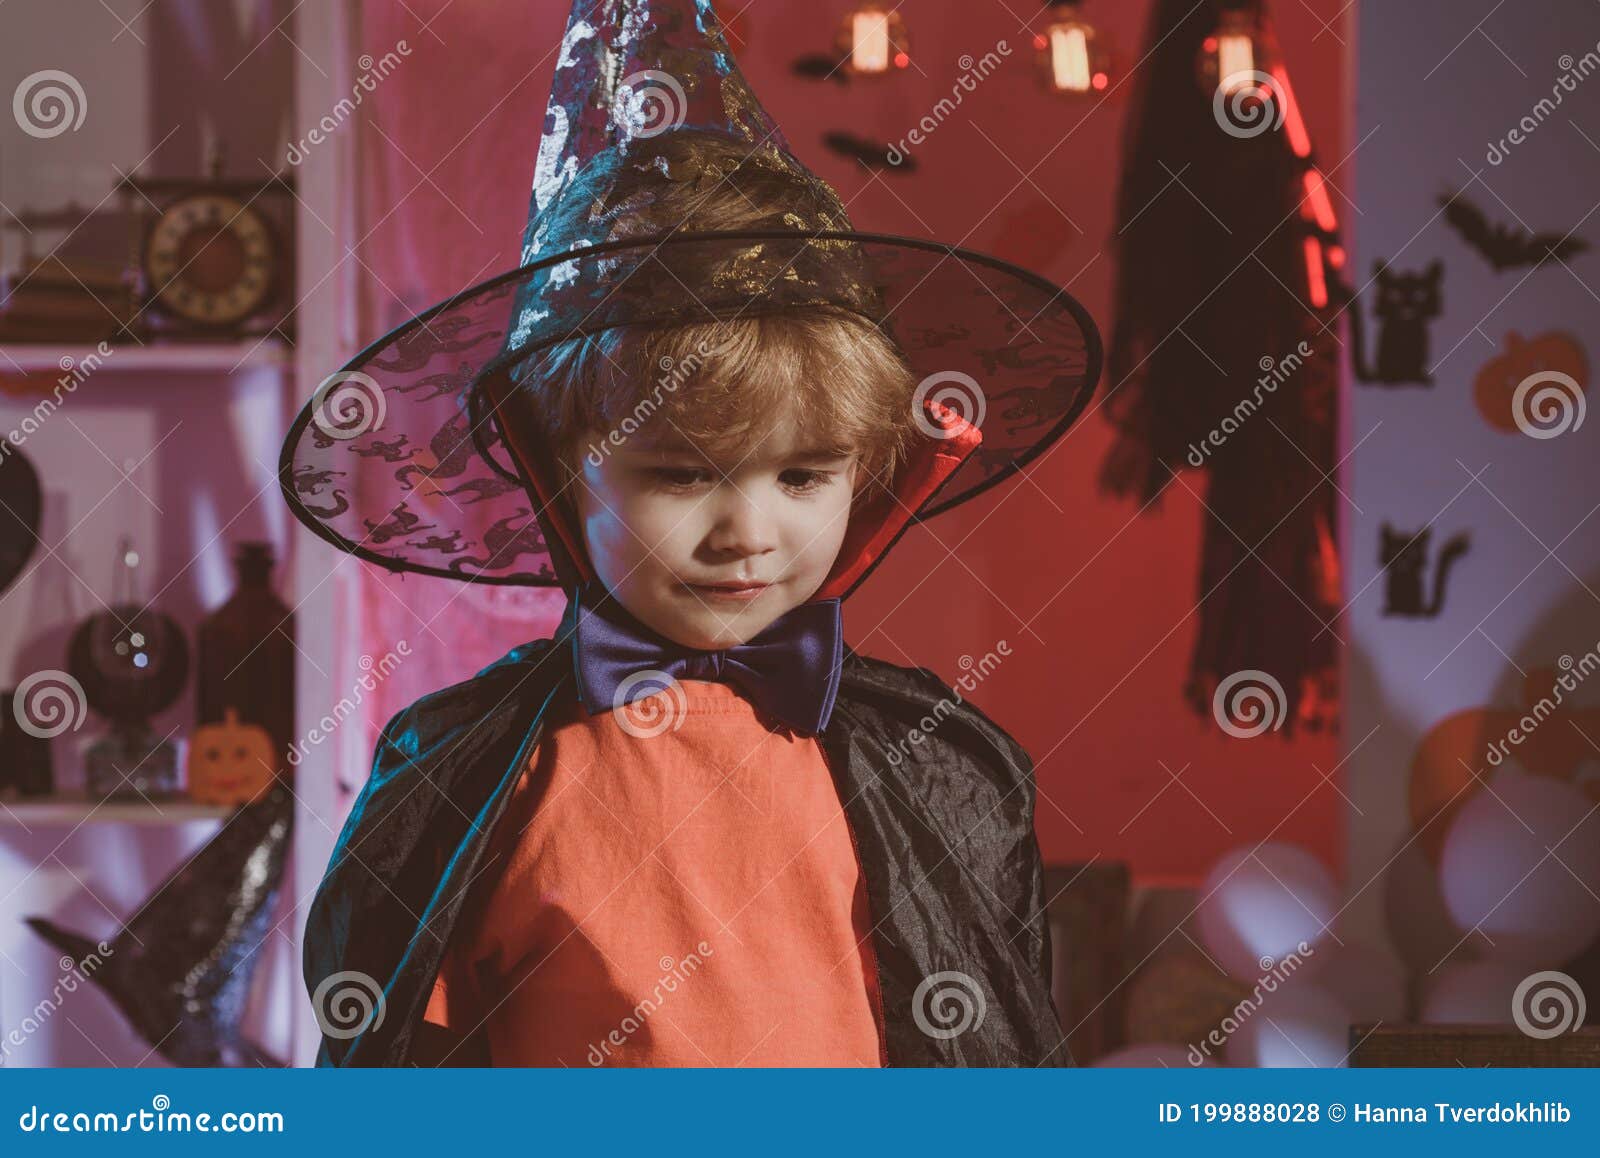 A Modest Shy Child. Little Wizard for Halloween. Child in Costume for ...